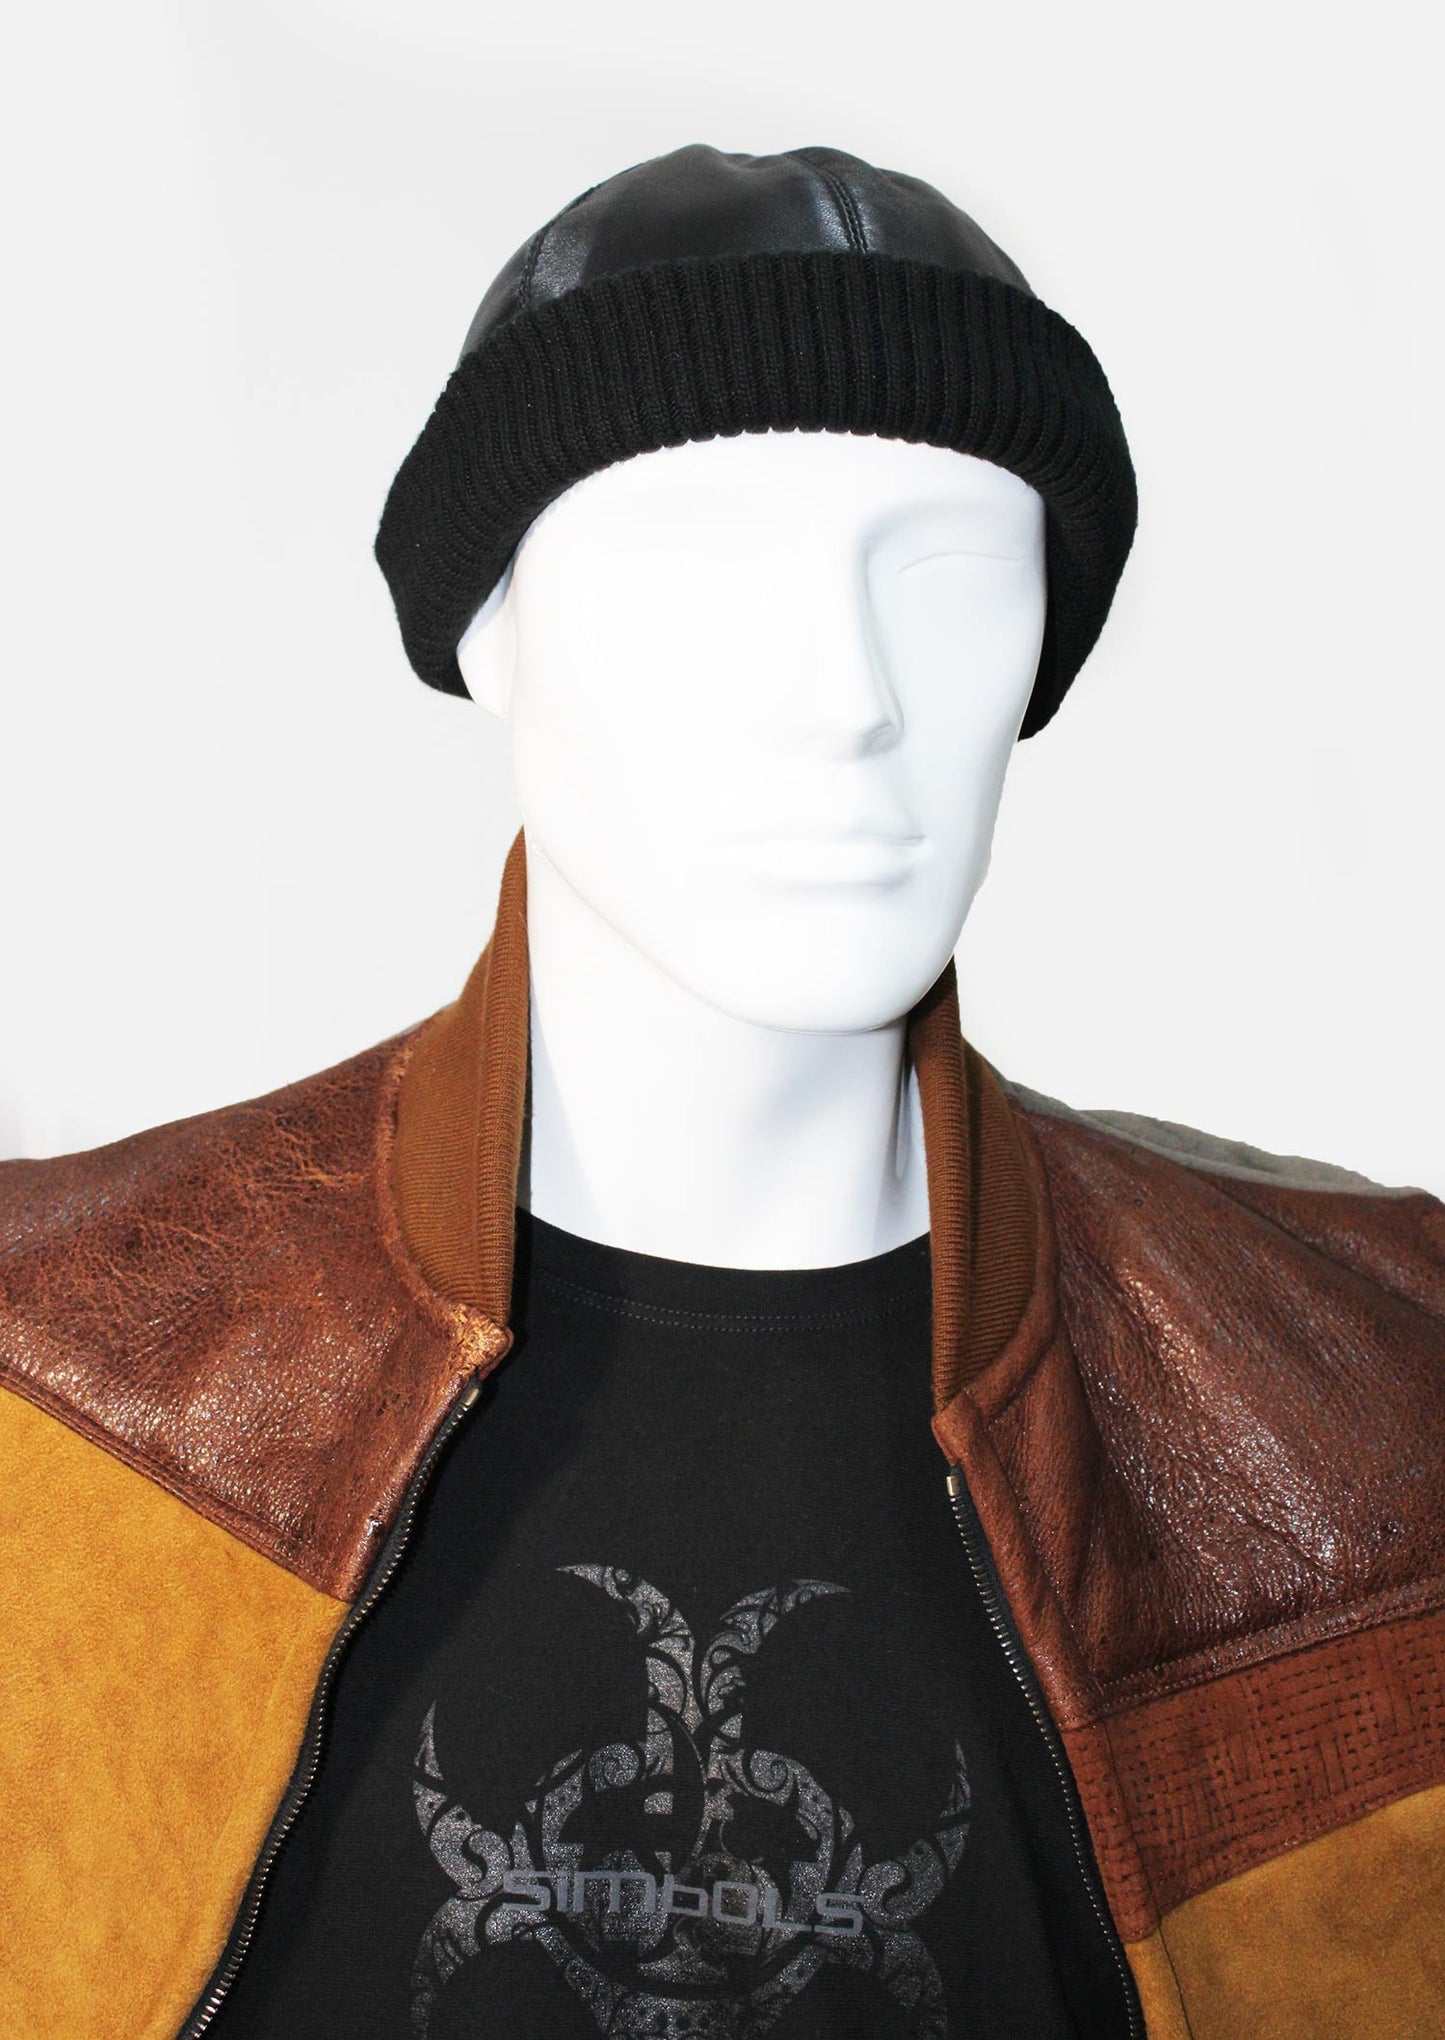 Zuccotto Hat in Black Leather and Elastic Knit - Sicilian Elegance by Ferdinando Patermo